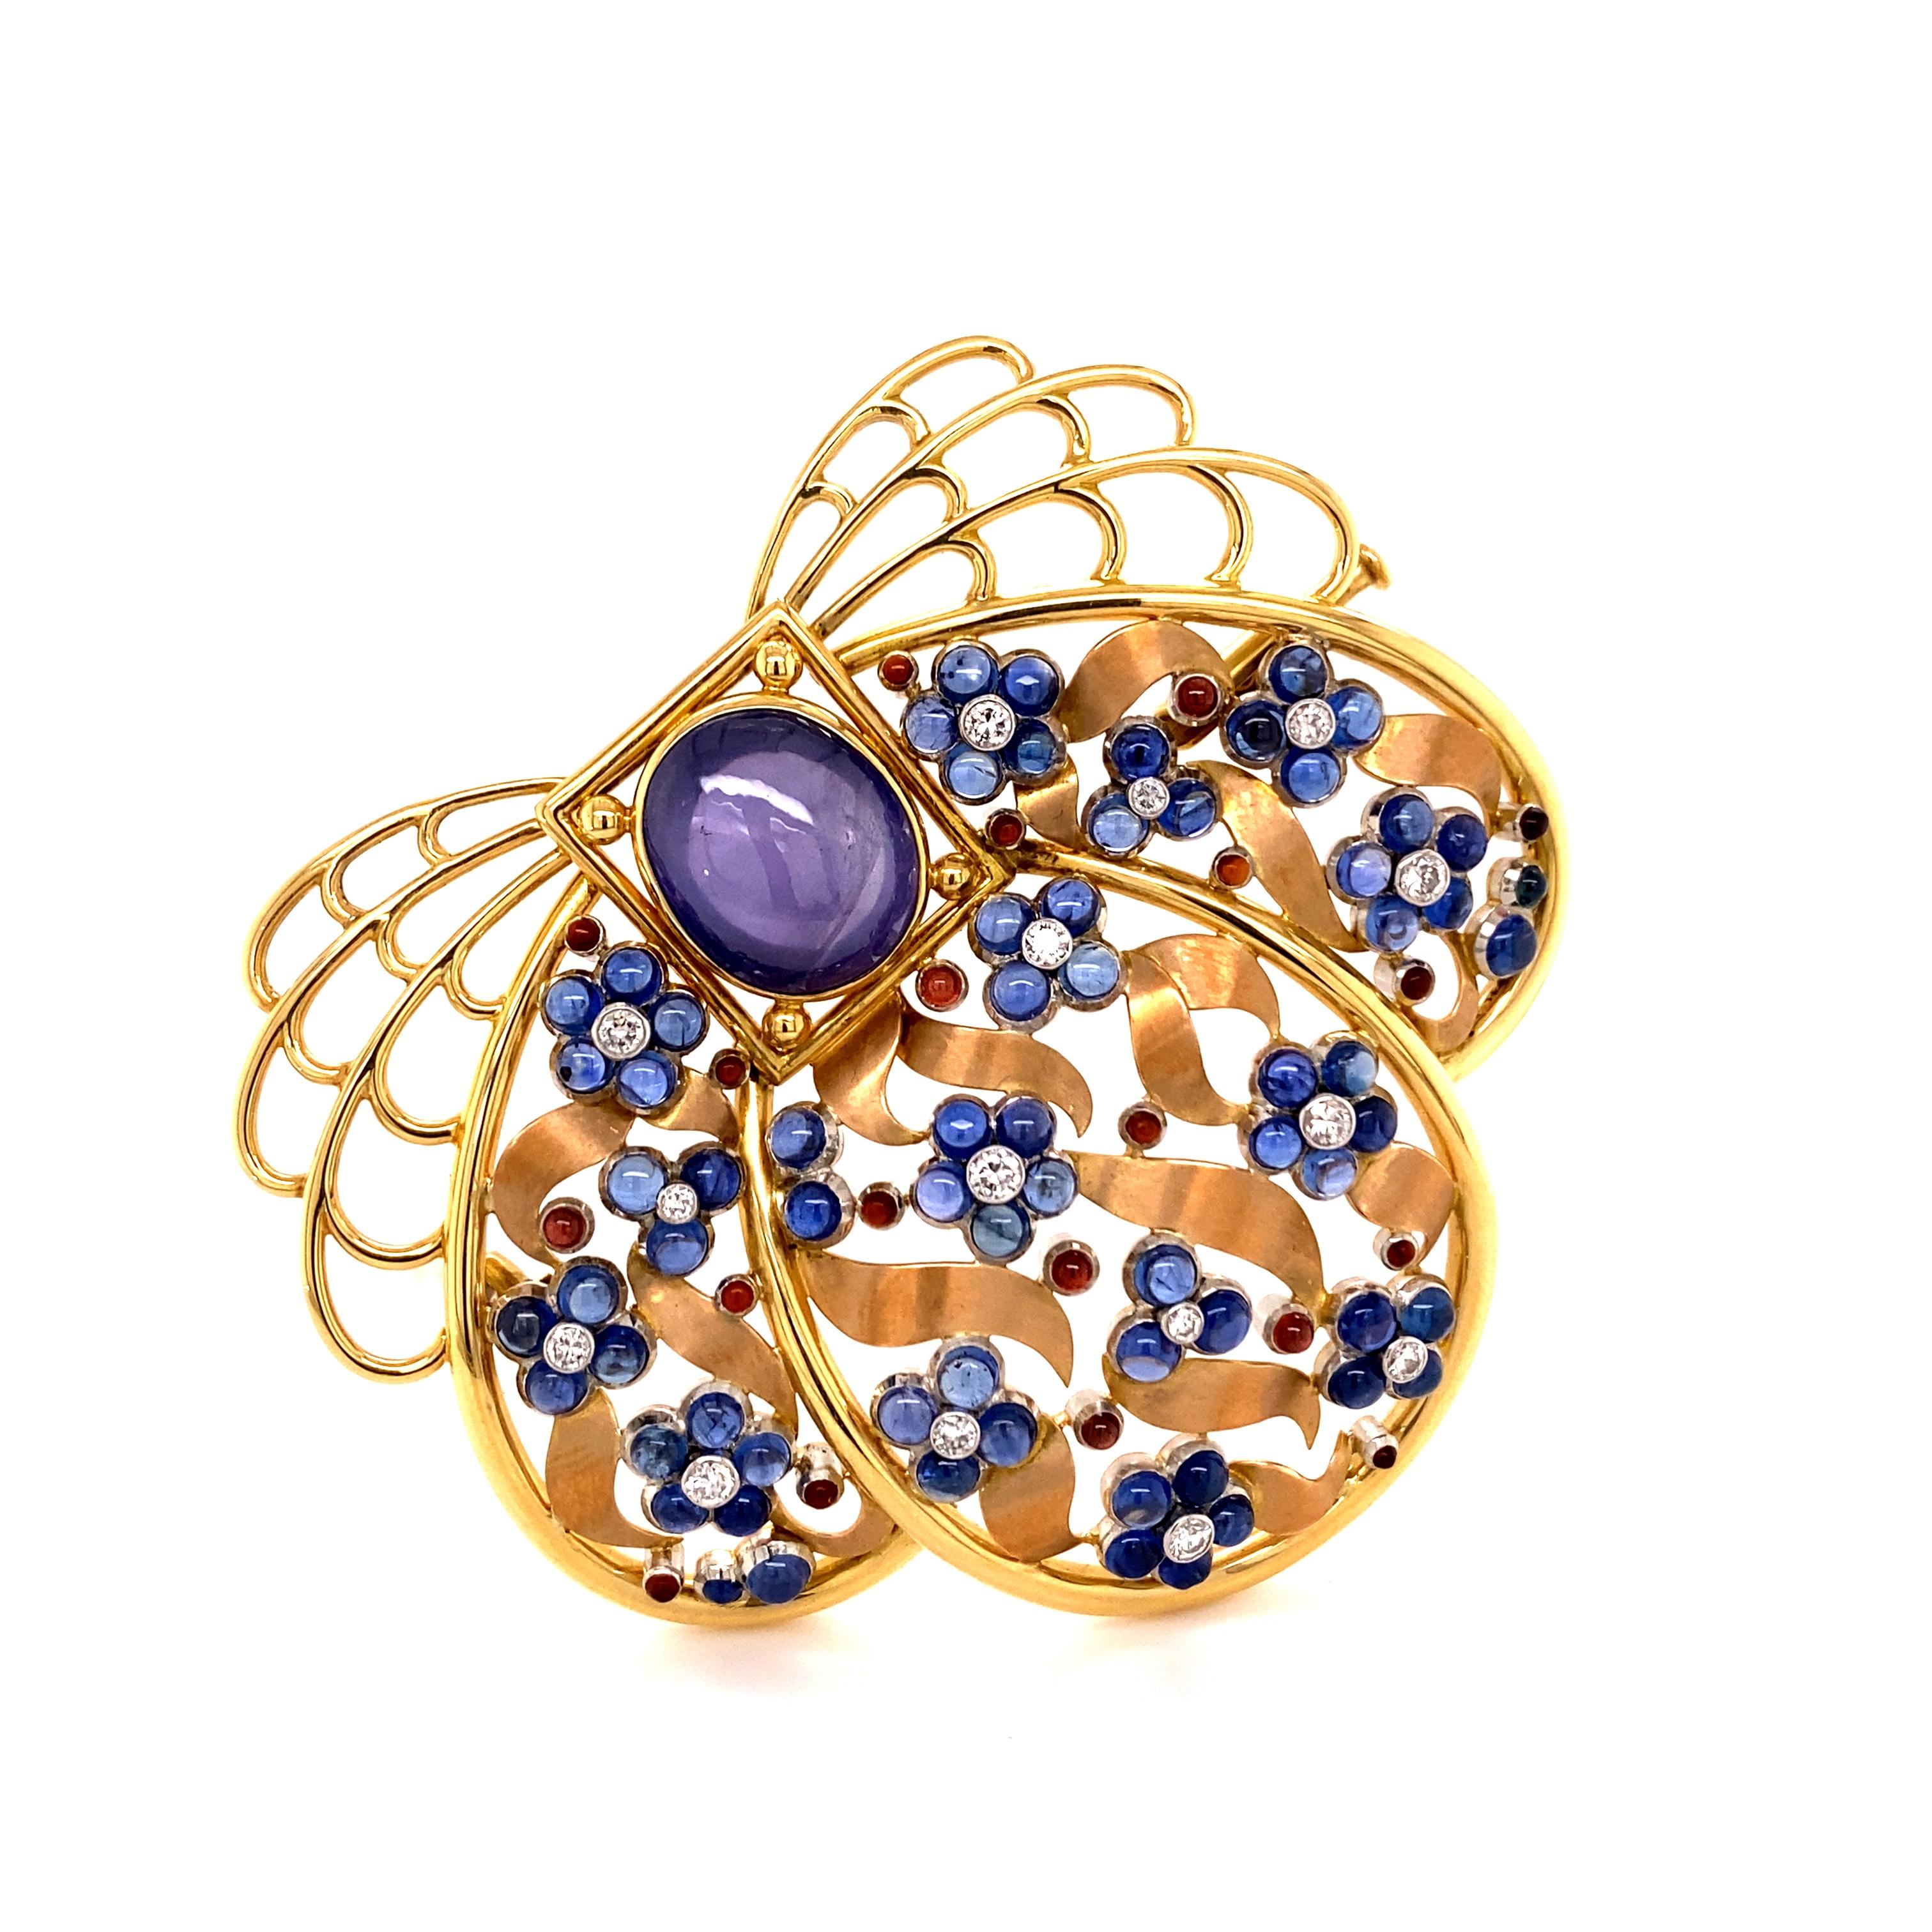 This beautiful and artfully designed brooch from the famous Swiss jeweller MEISTER is crafted in 18 karat yellow, rose, and white gold.
The centre is set with a transparent oval-shaped star sapphire of approximately 9.85 carats. The motif is